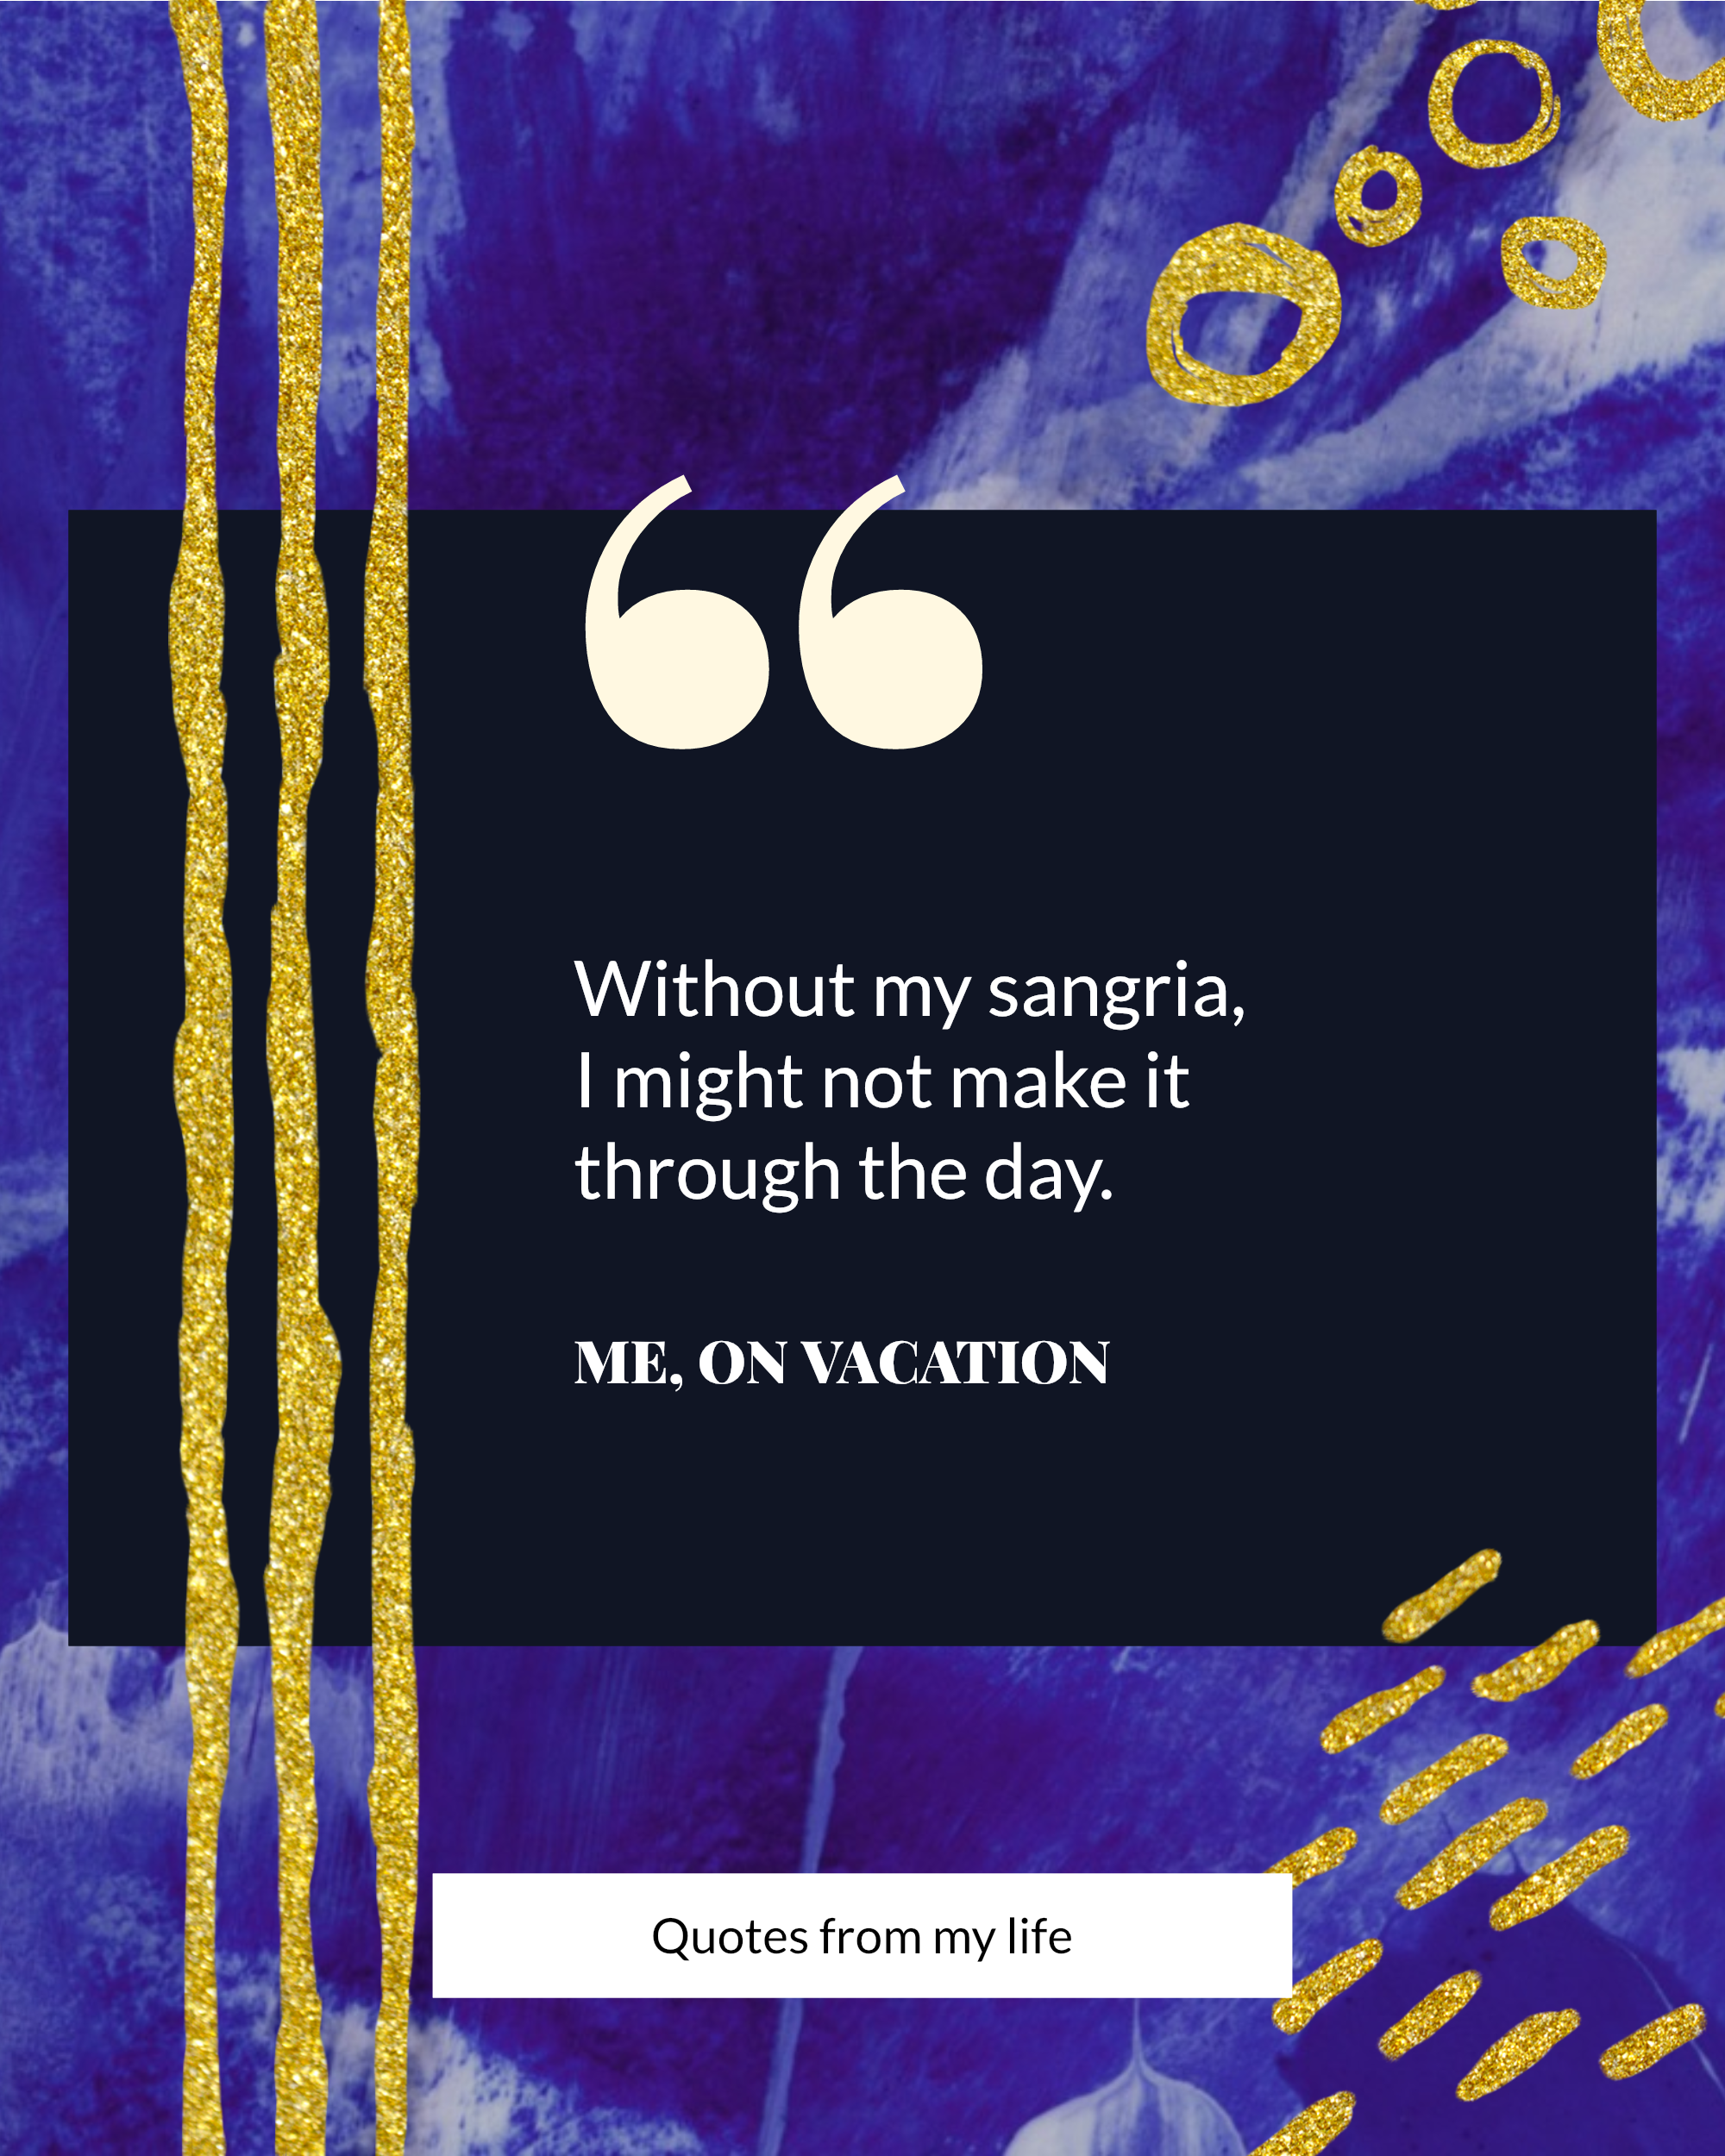 #bluegold Post collection - “ Without my sangria, I might not make it through the day. ME, ON VACATION Quotes from my life Instagram Post Template